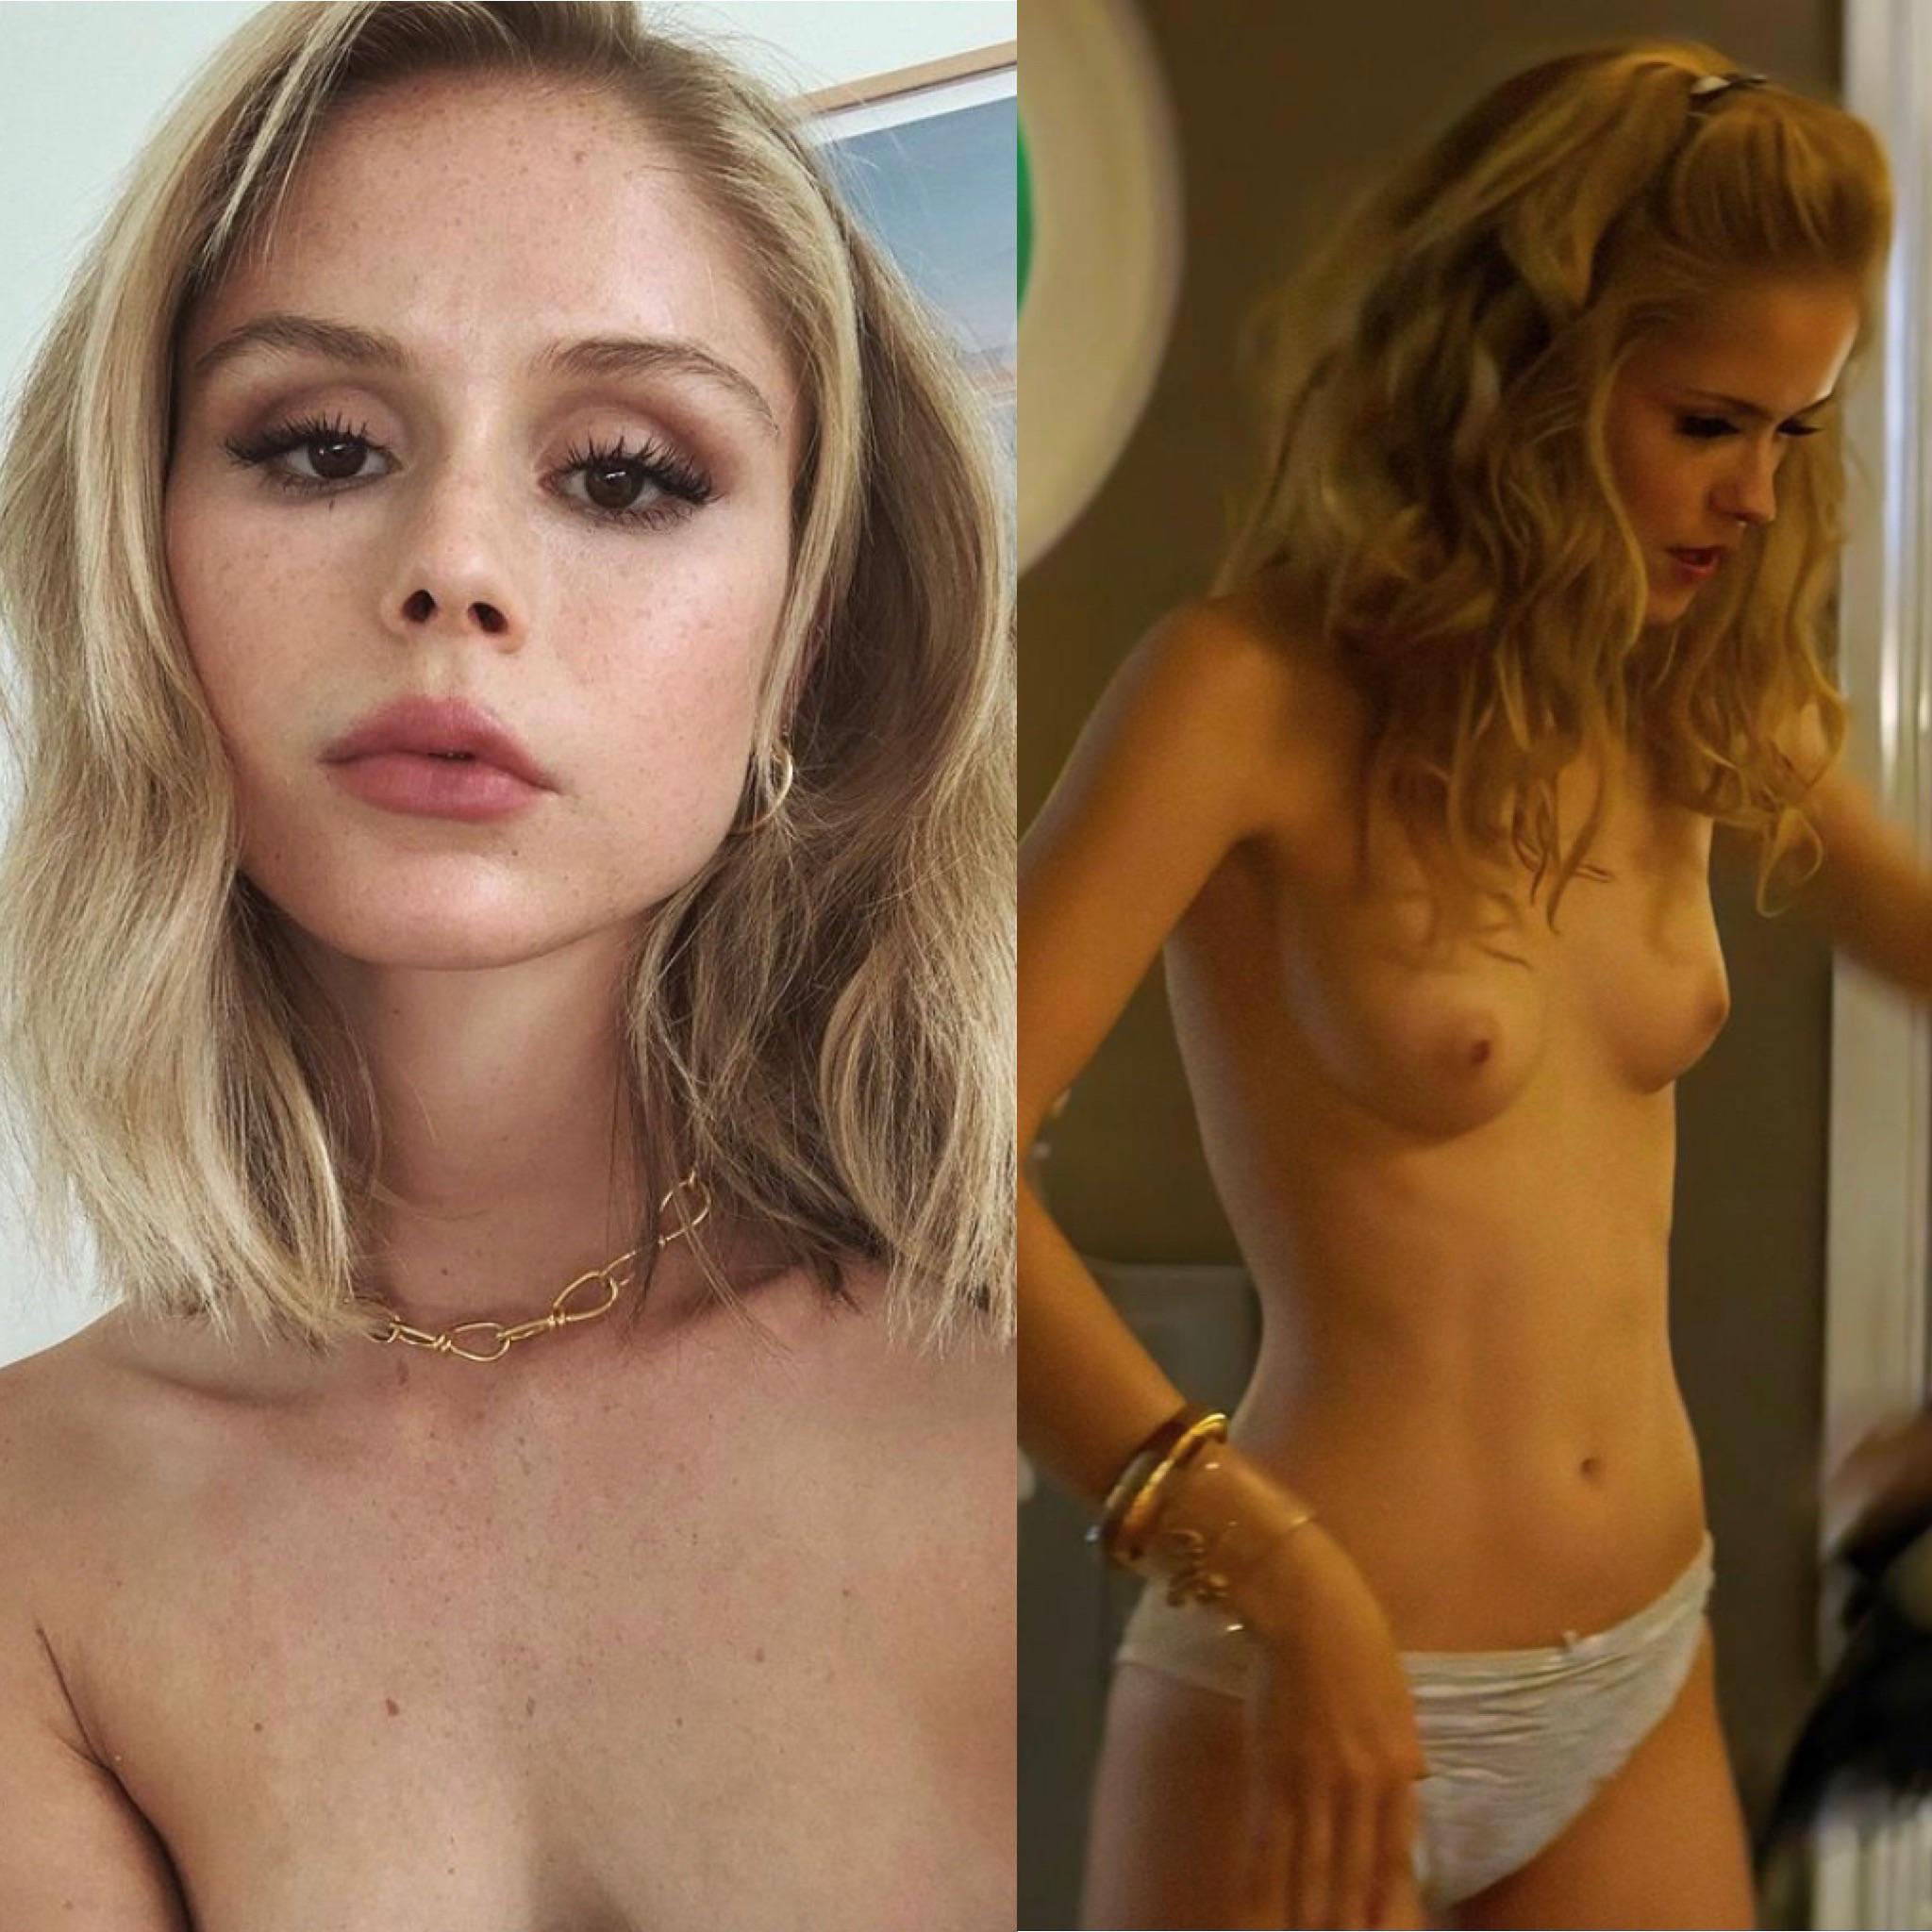 Erin moriarty leaked nude